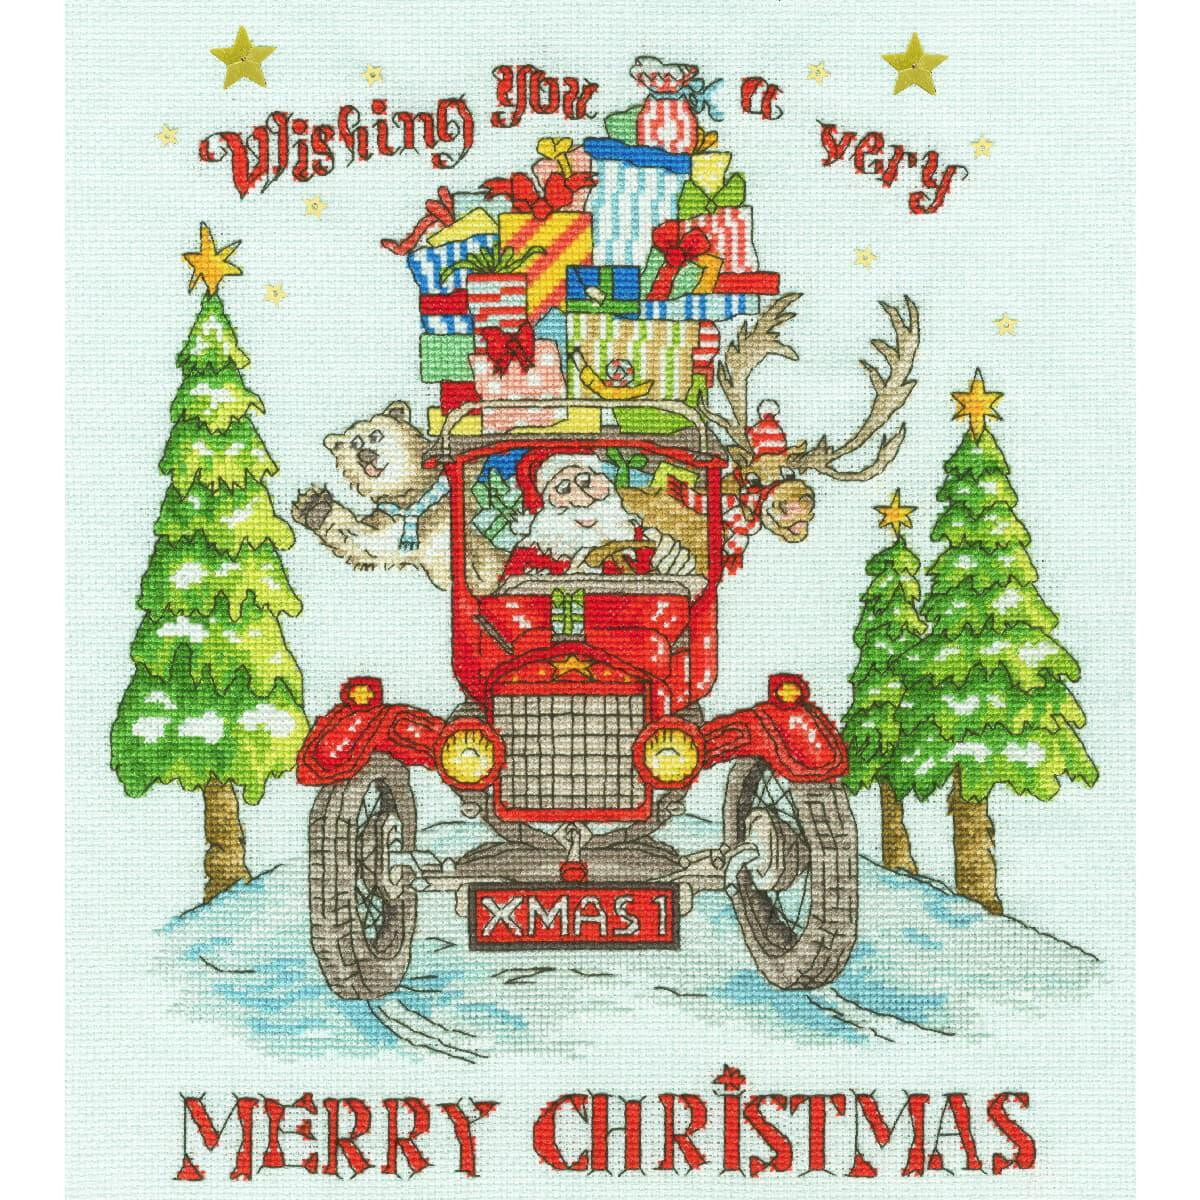 An illustration of Santa Claus driving a red vintage car...